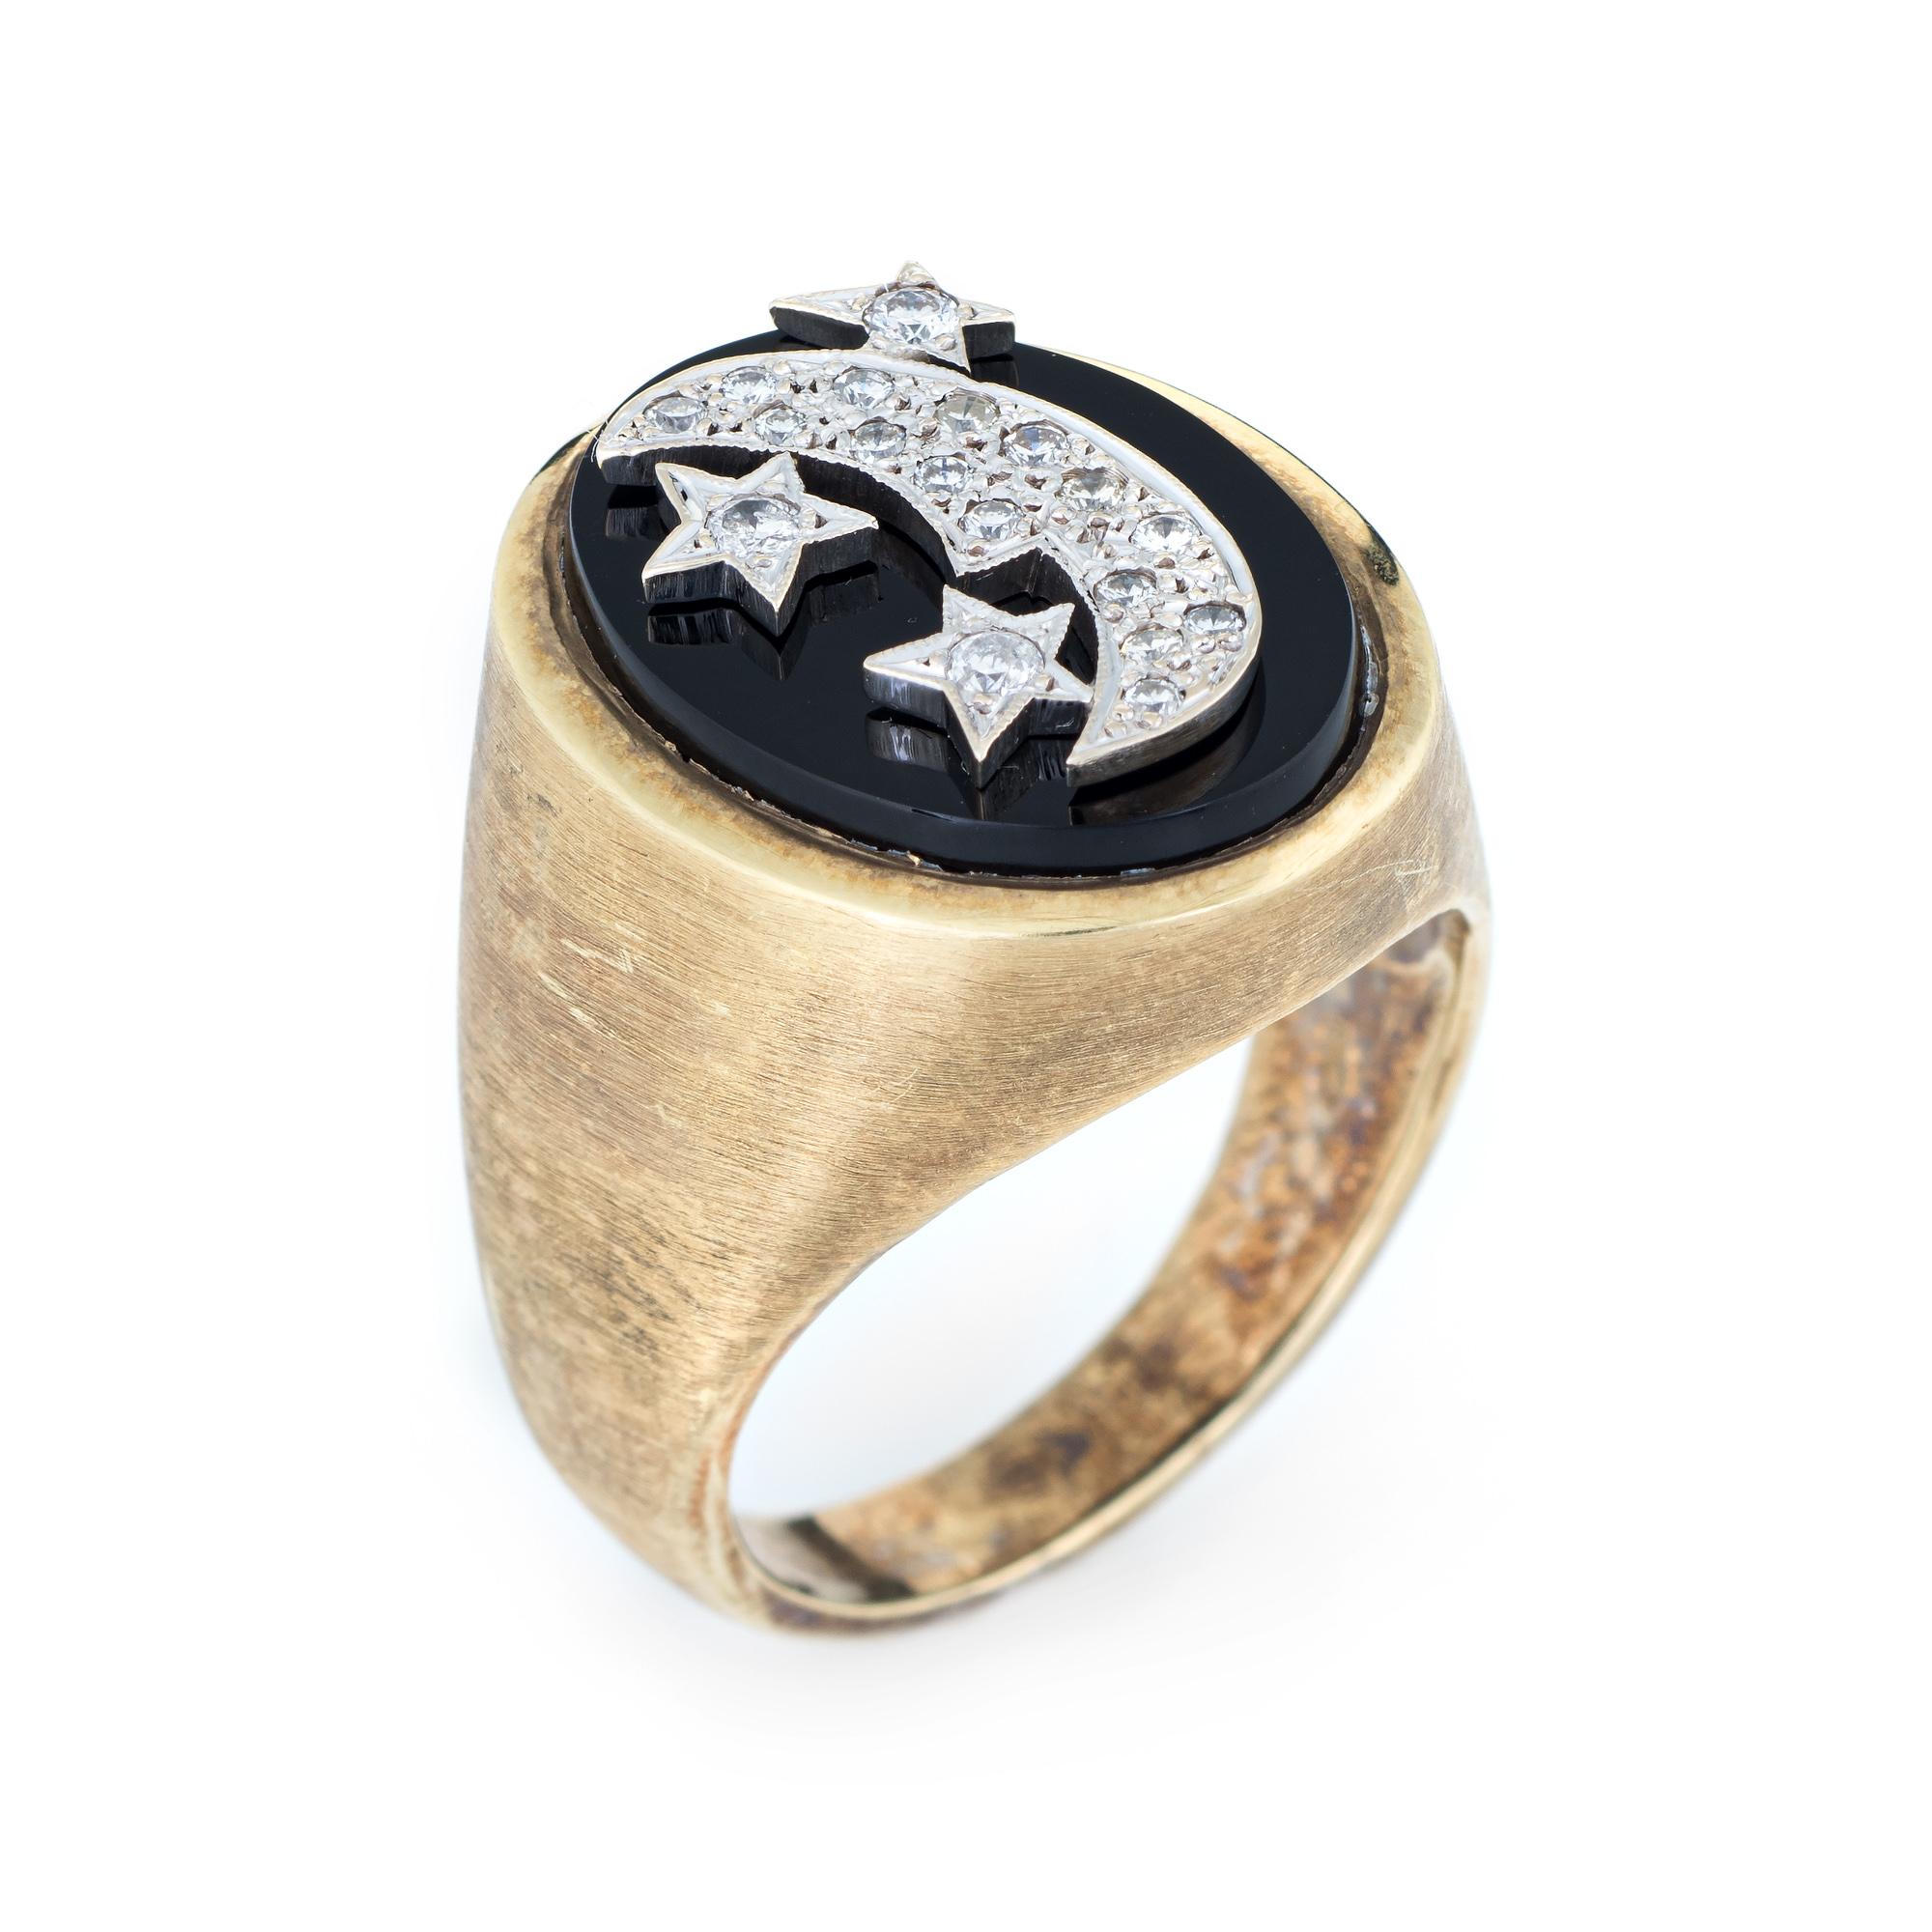 Finely detailed vintage moon & star ring (circa 1970s), crafted in 14 karat yellow gold. 

Round brilliant cut diamonds total an estimated 0.20 carats (estimated at H-I color and VS2-SI1 clarity). The diamonds are set upon an oval black onyx mount